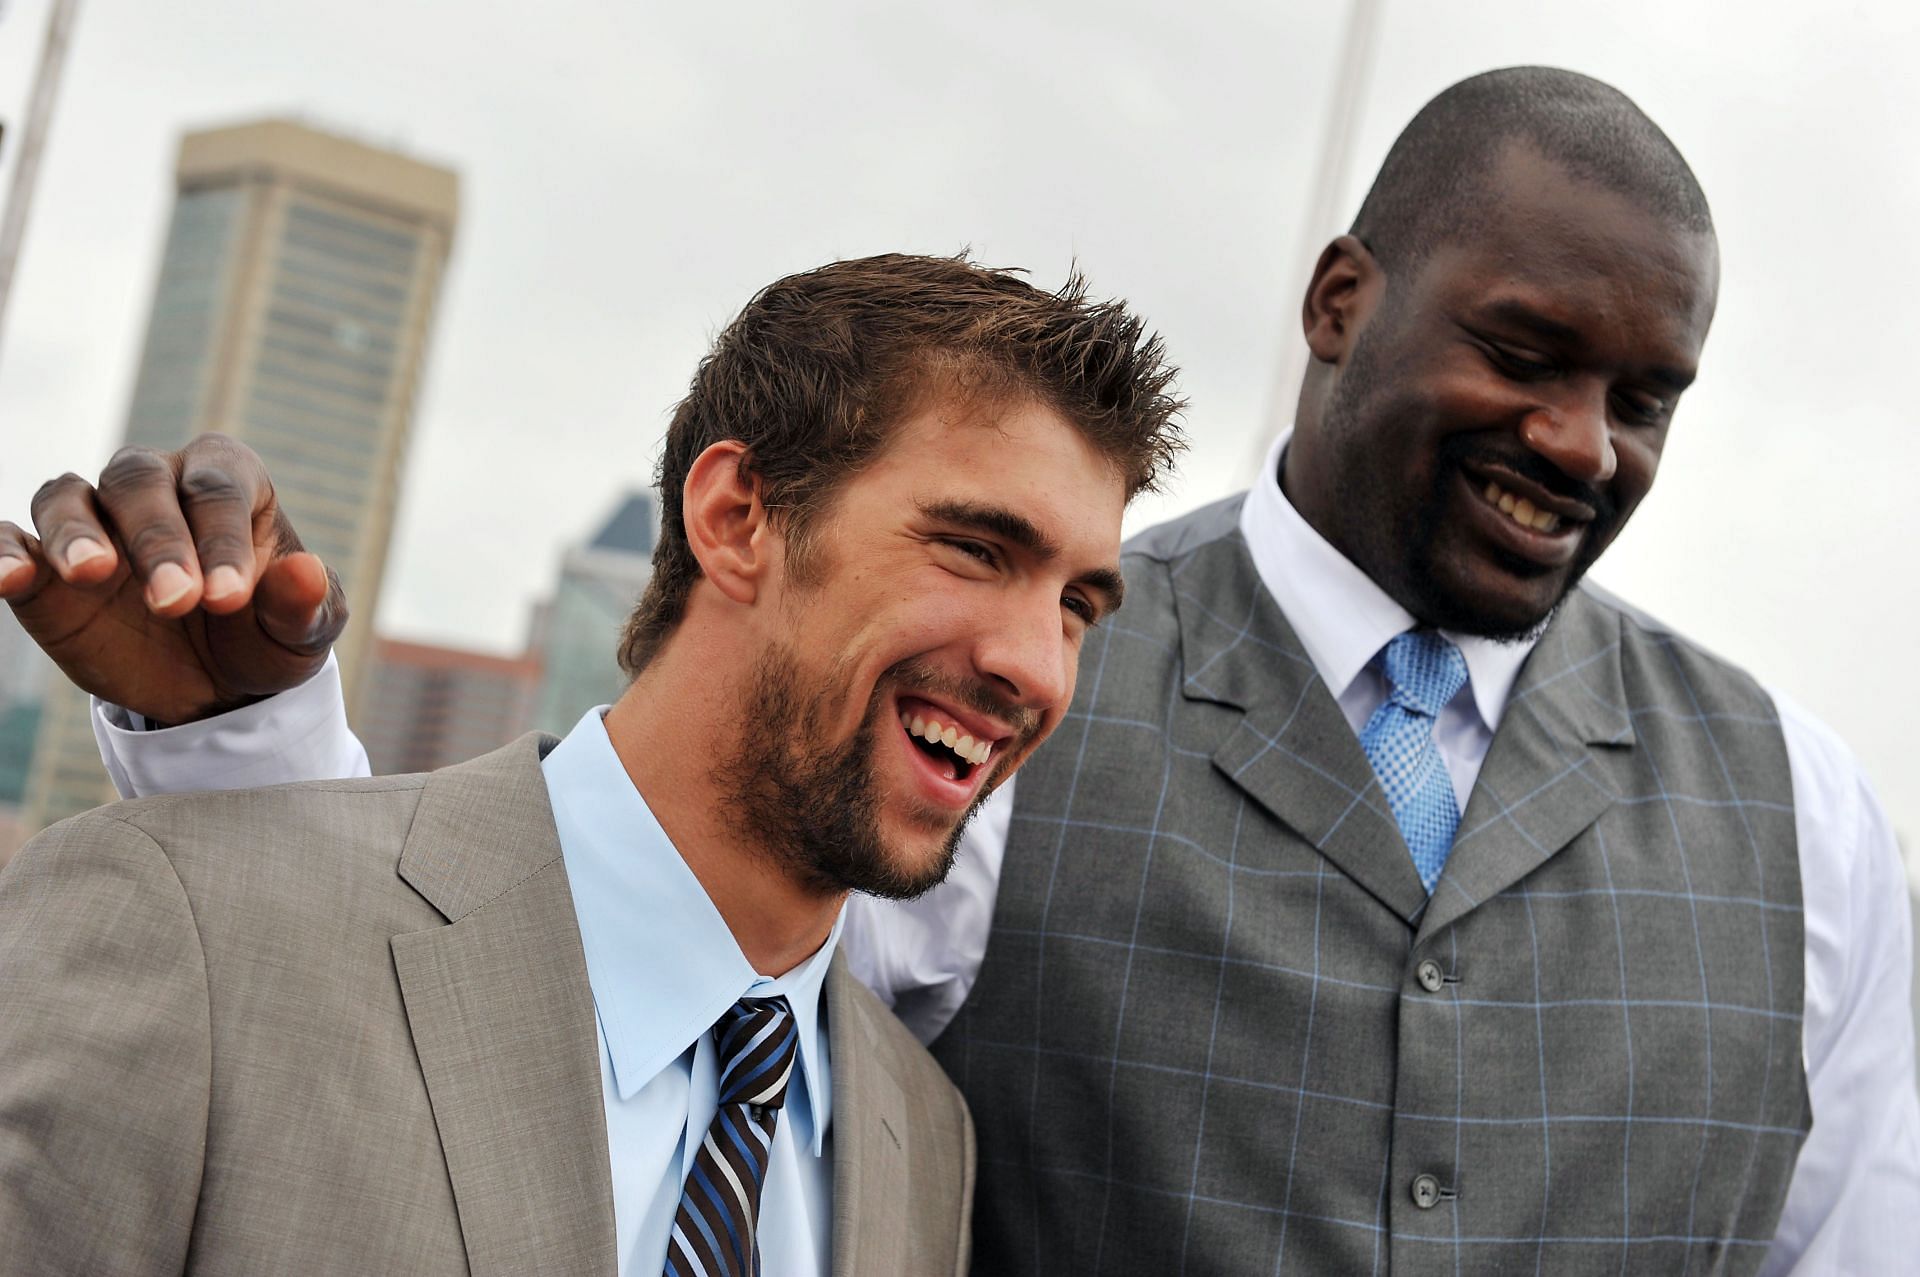 Michael Phelps and basketball star Shaquille O&#039;Neal pose for pictures after a press conference for O&#039;Neal&#039;s reality TV series &quot;Shaq Vs&quot; at the Rusty Scupper Restaurant on August 22, 2009 in Baltimore, Maryland.